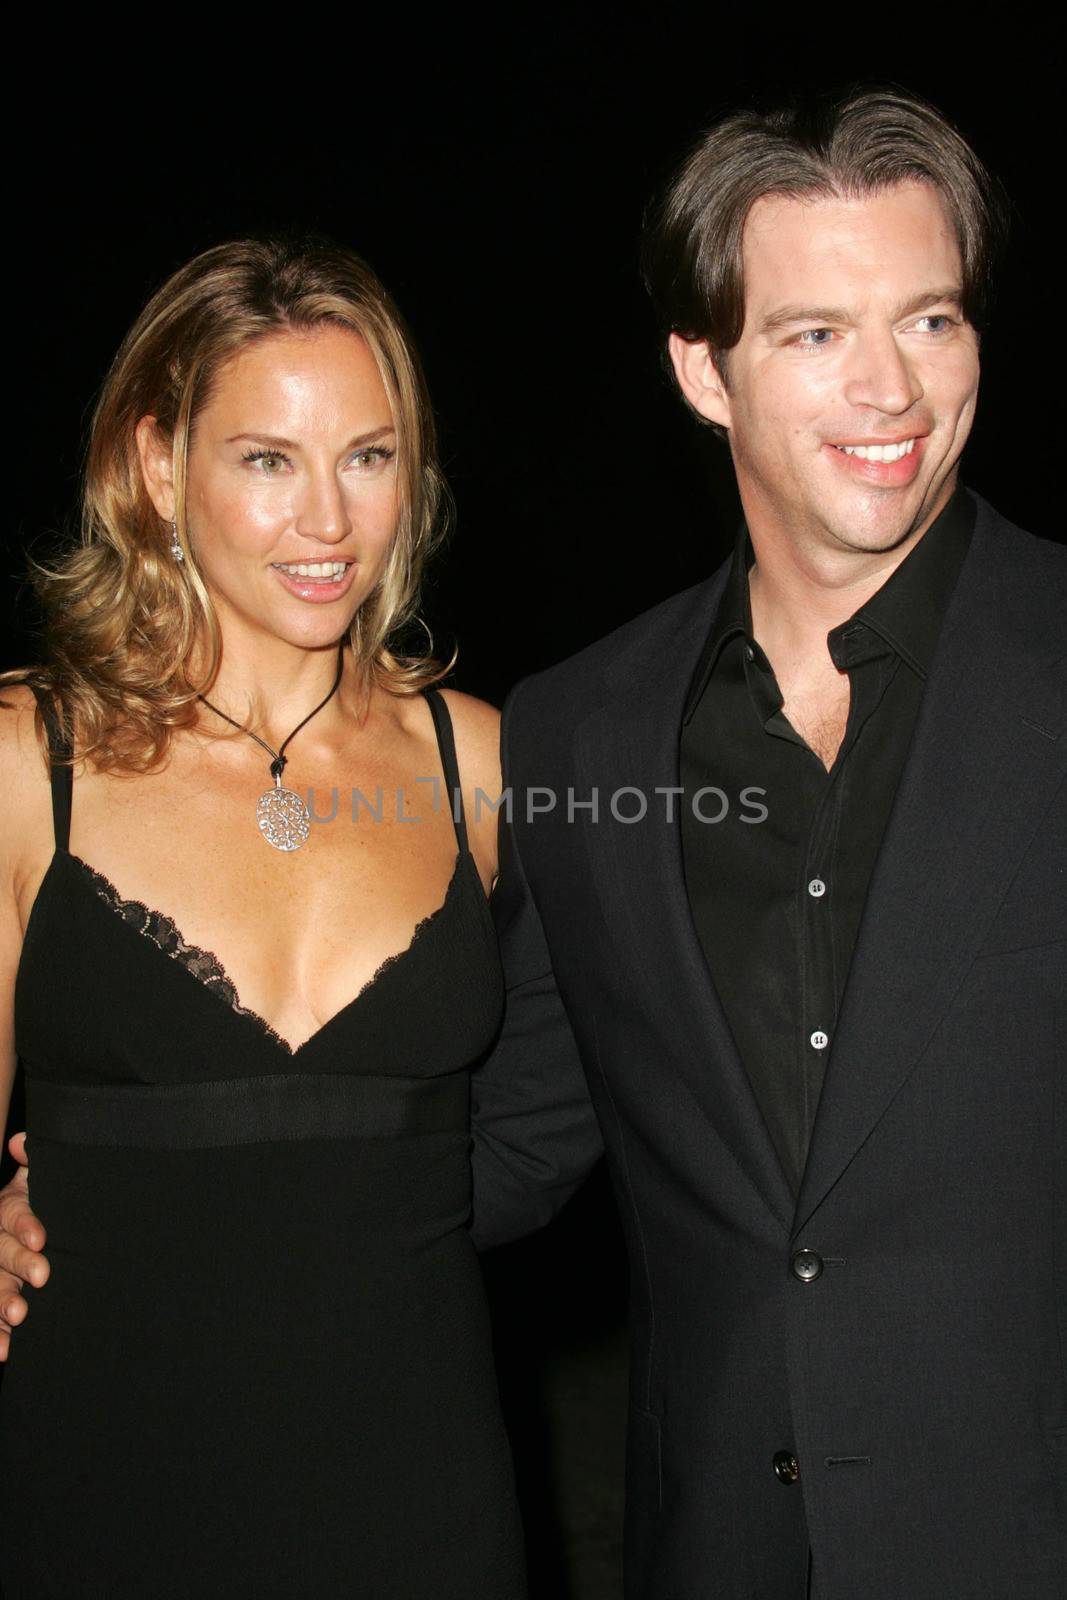 Jill Goodacre and Harry Connick Jr.
at the 2nd Annual A Fine Romance, Hollywood and Broadway Musical Fundraiser. Sunset Gower Studios, Hollywood, CA. 11-18-06